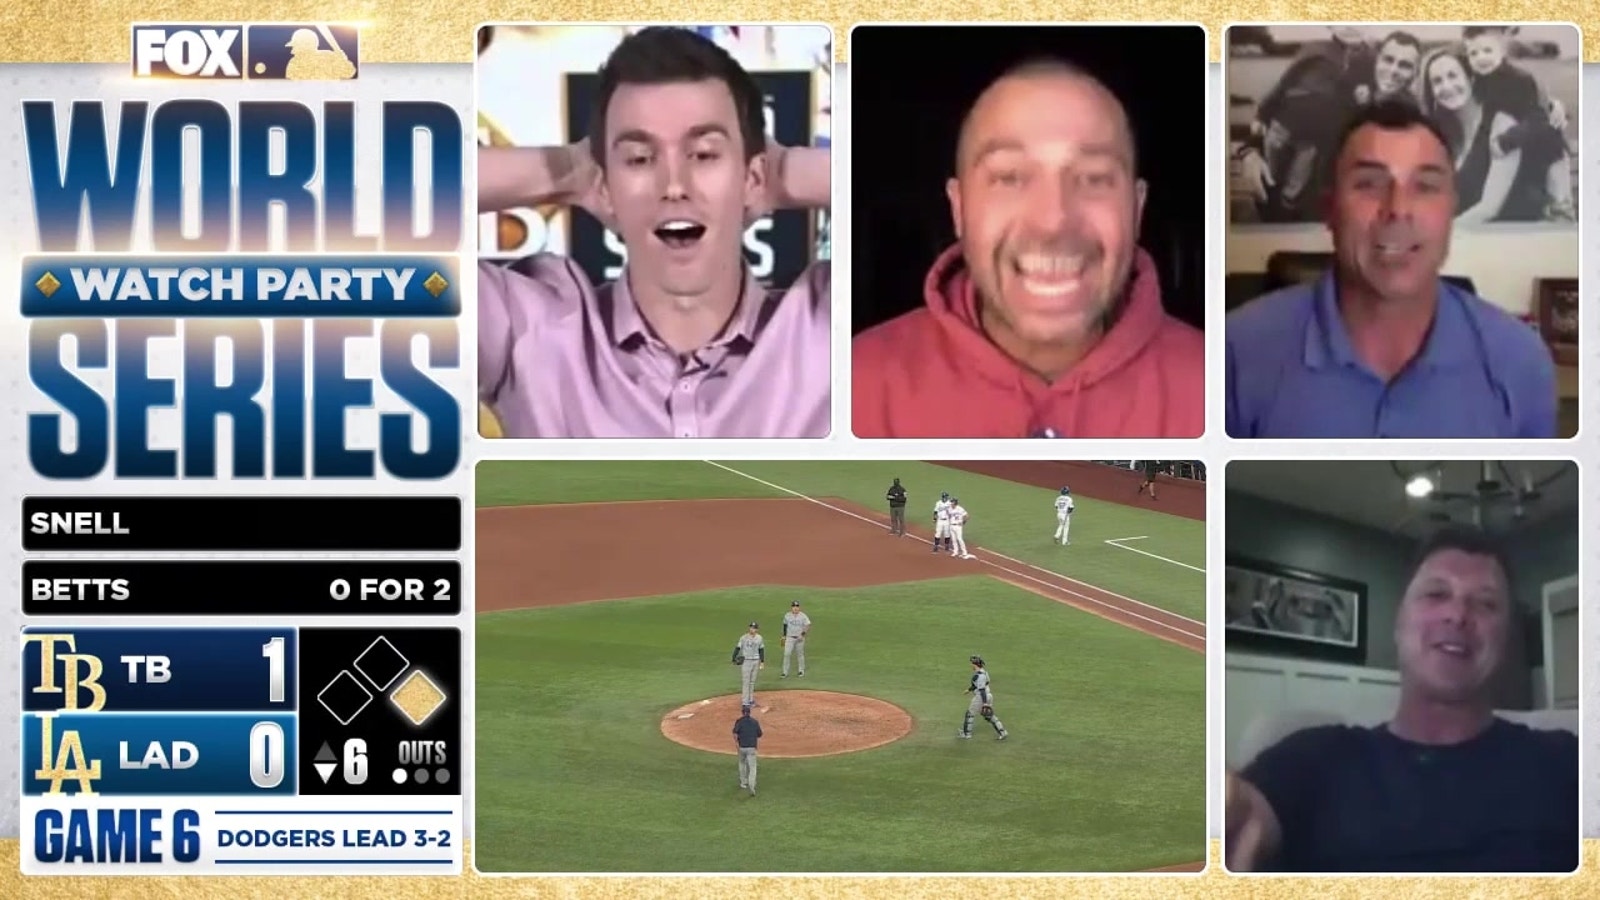 Blake Snell removed for reliever by Kevin Cash -- World Series Watch Party is stunned